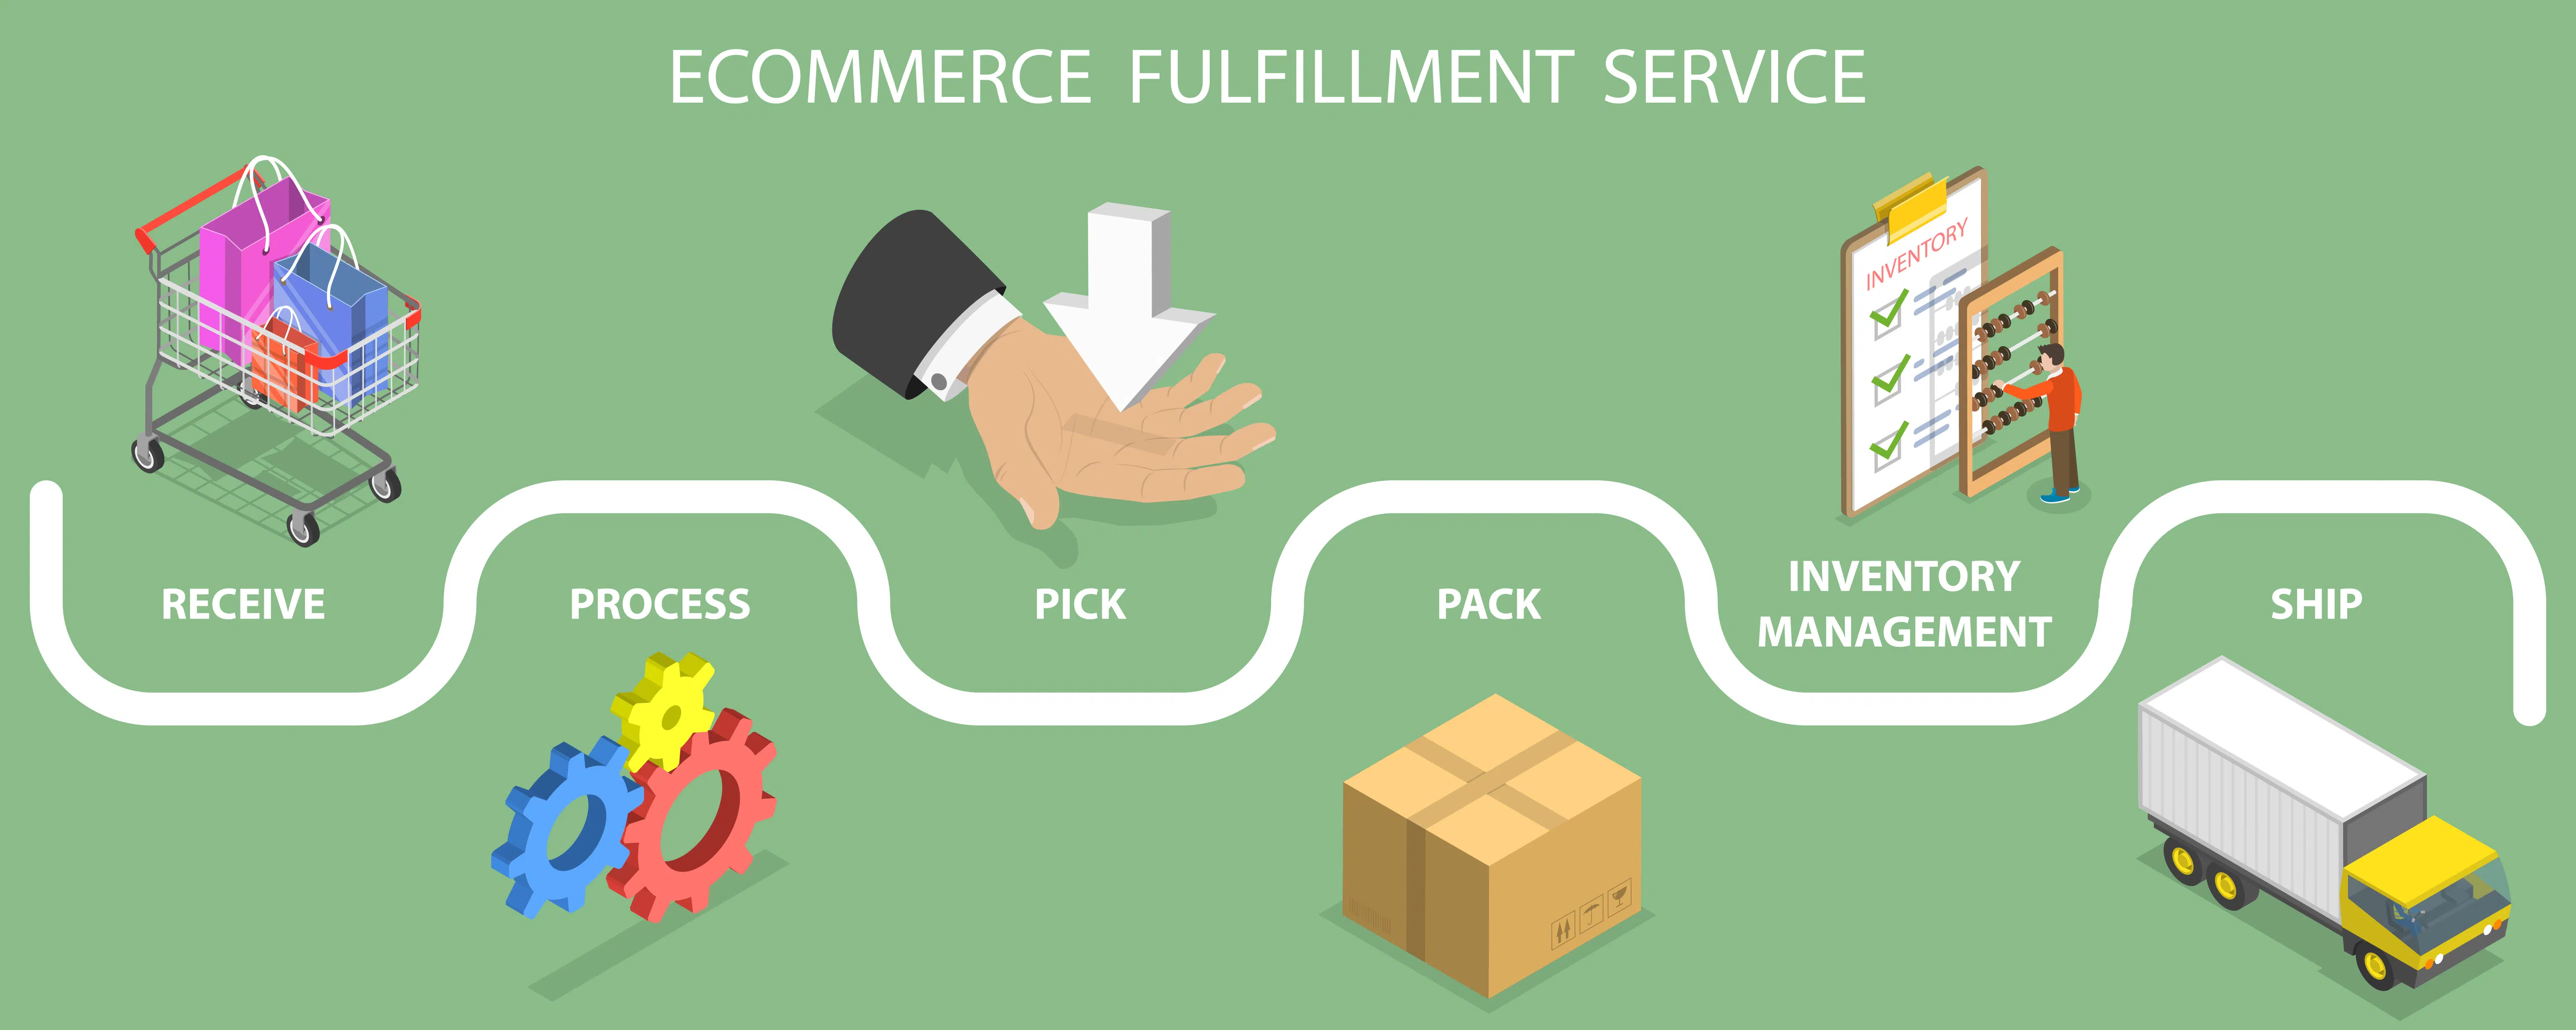 Ecommerce Fulfillment Services